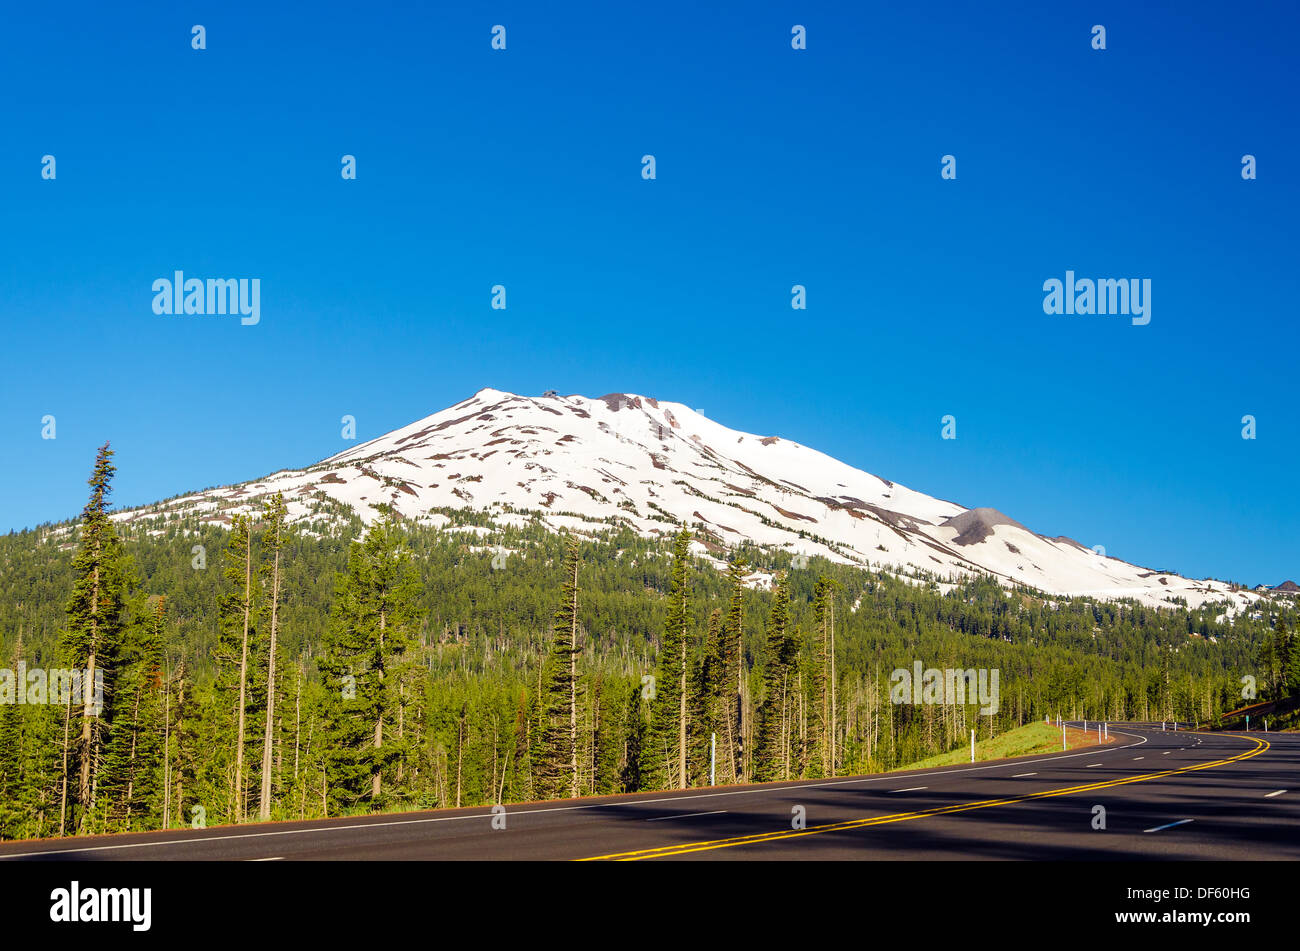 A highway leading through a forest passing next to snowy Mount Bachelor near Bend, Oregon Stock Photo